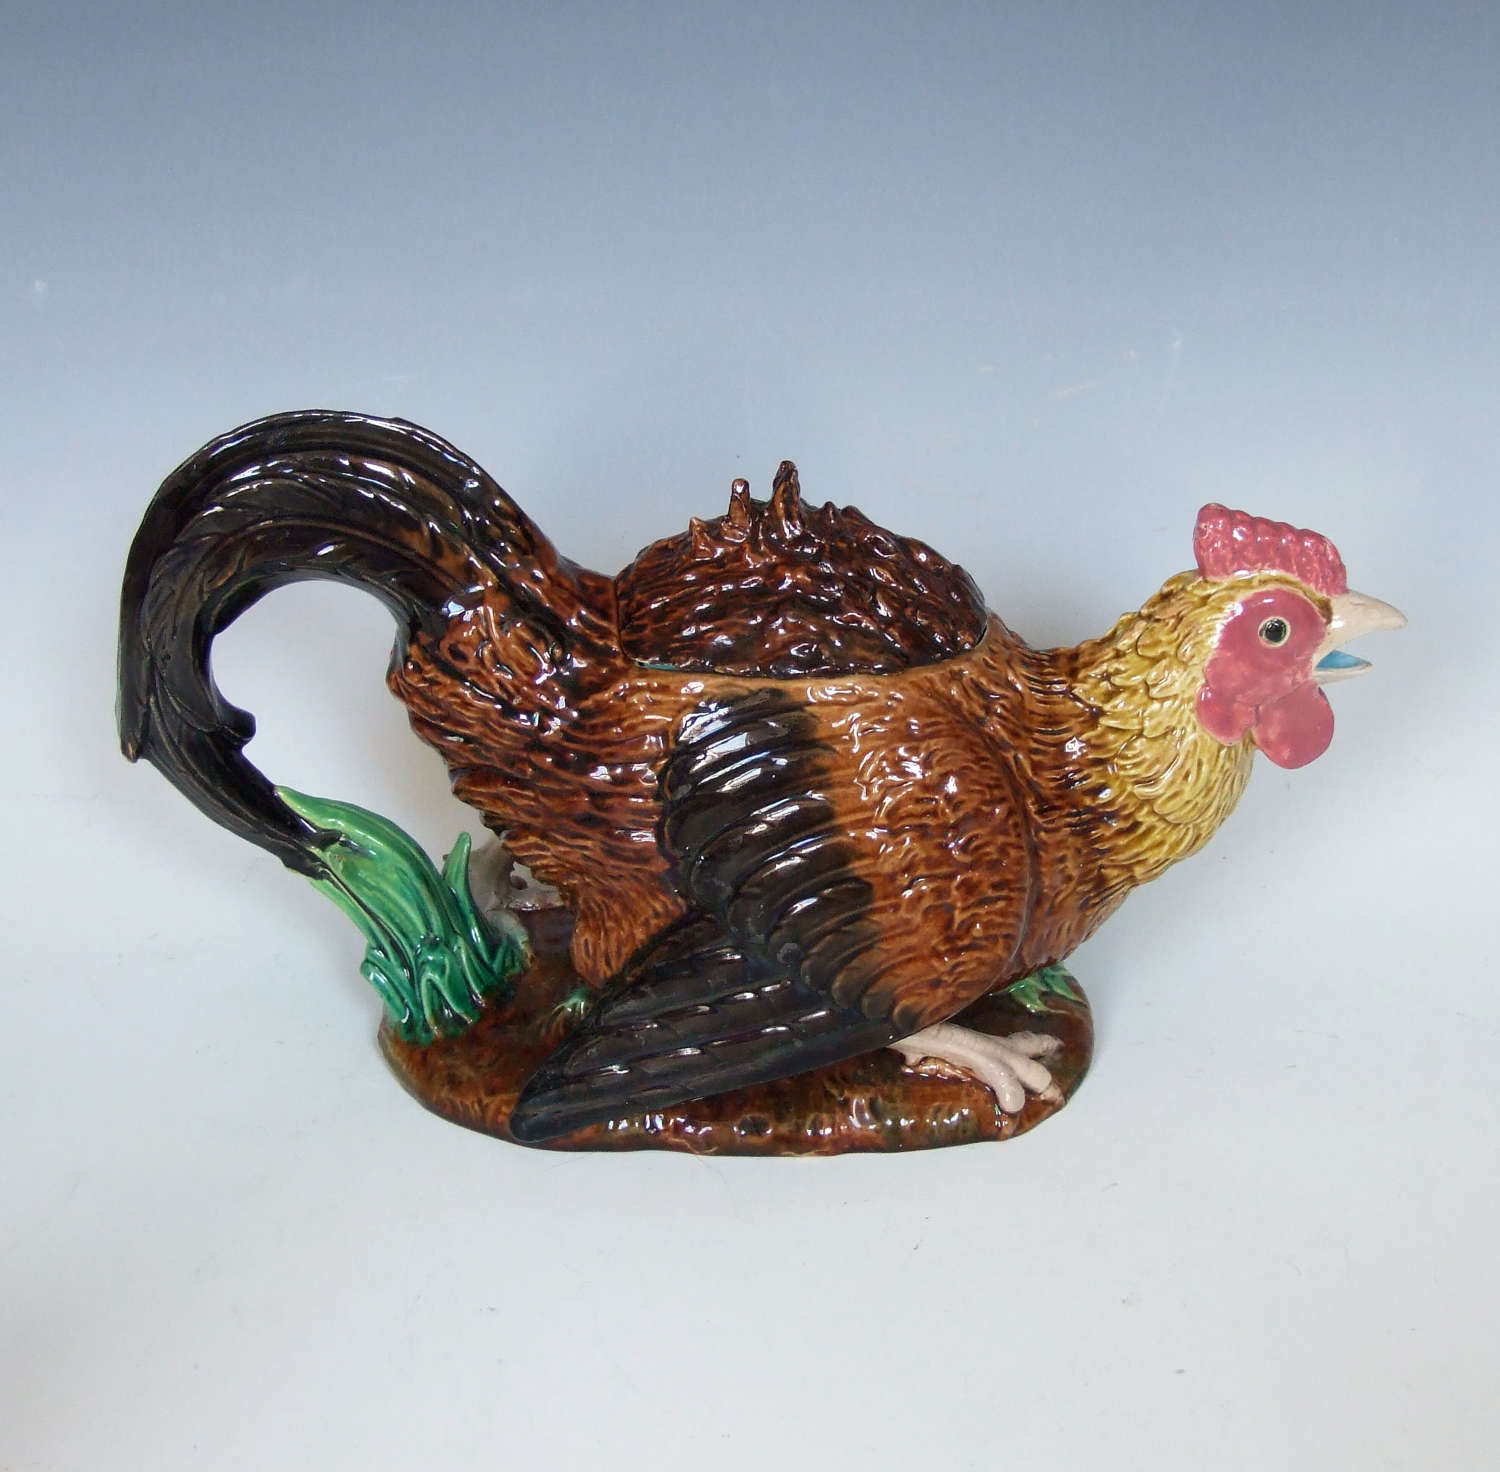 A fine and rare English majolica rooster teapot by George Jones.